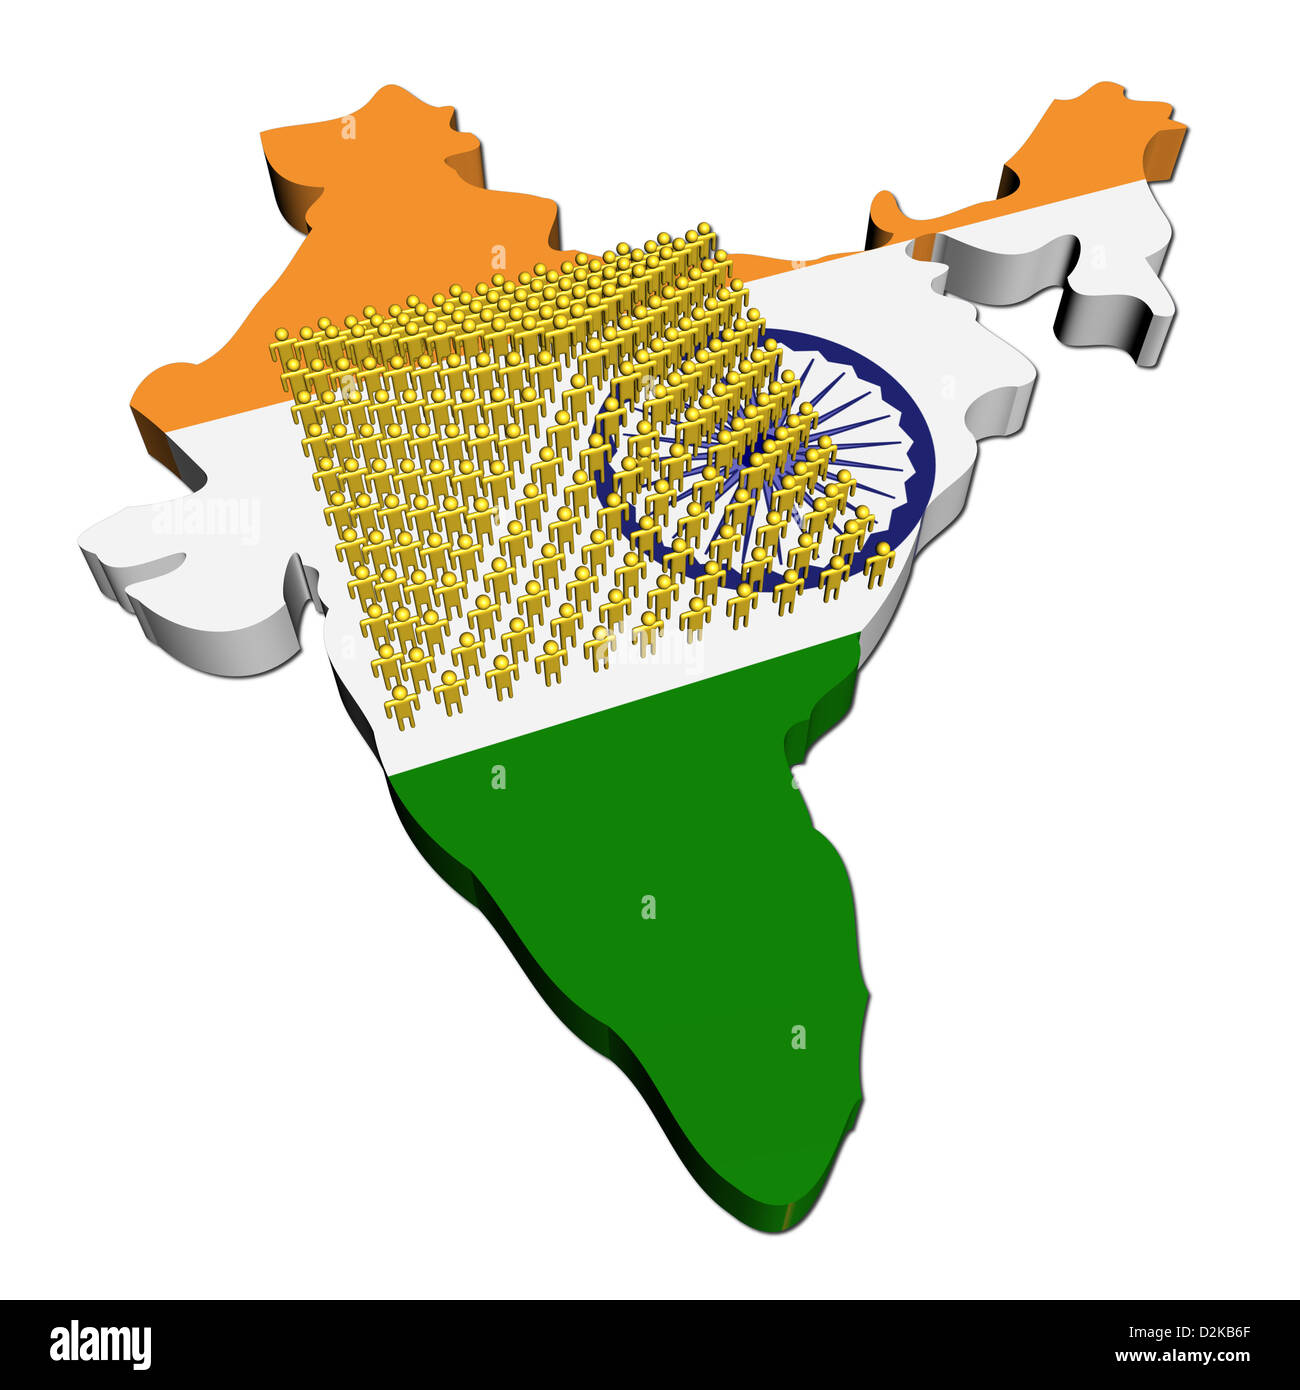 Pyramid of abstract people on India map flag illustration Stock Photo